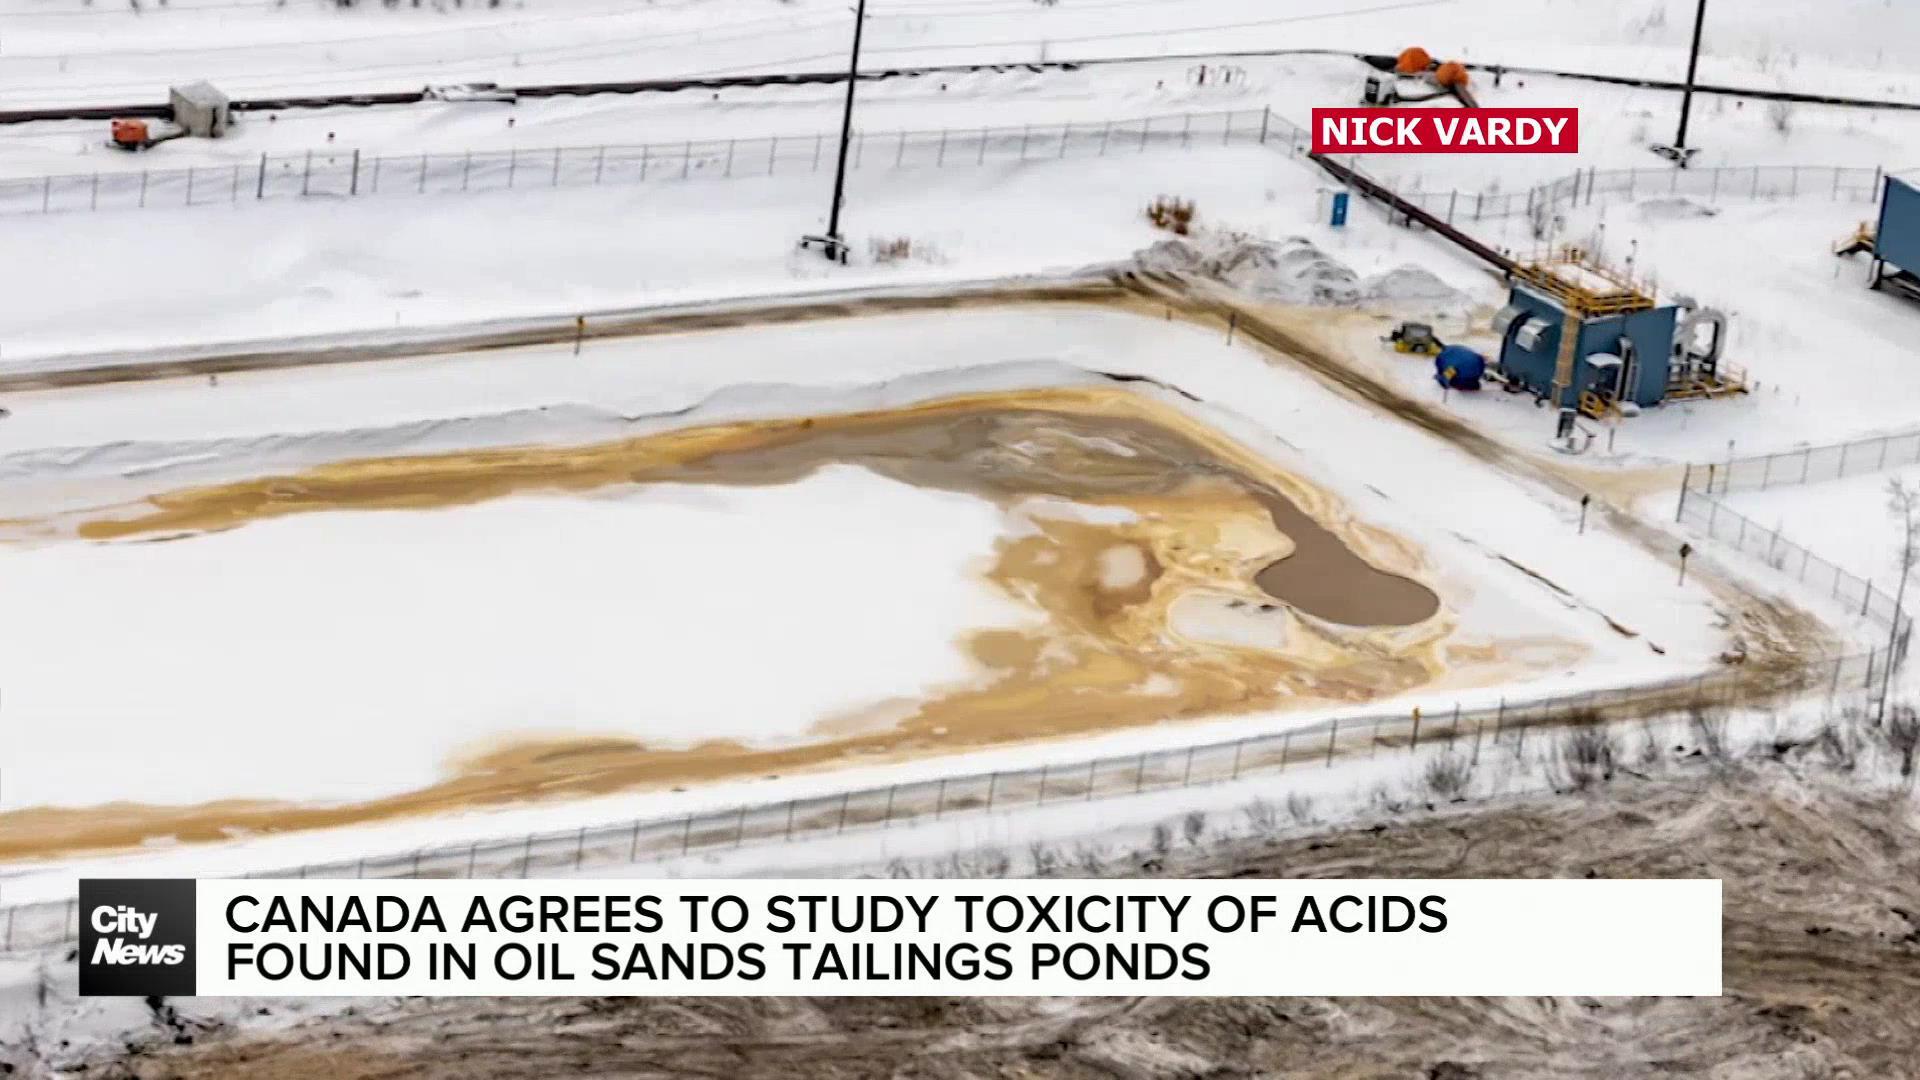 More study on tailings ponds